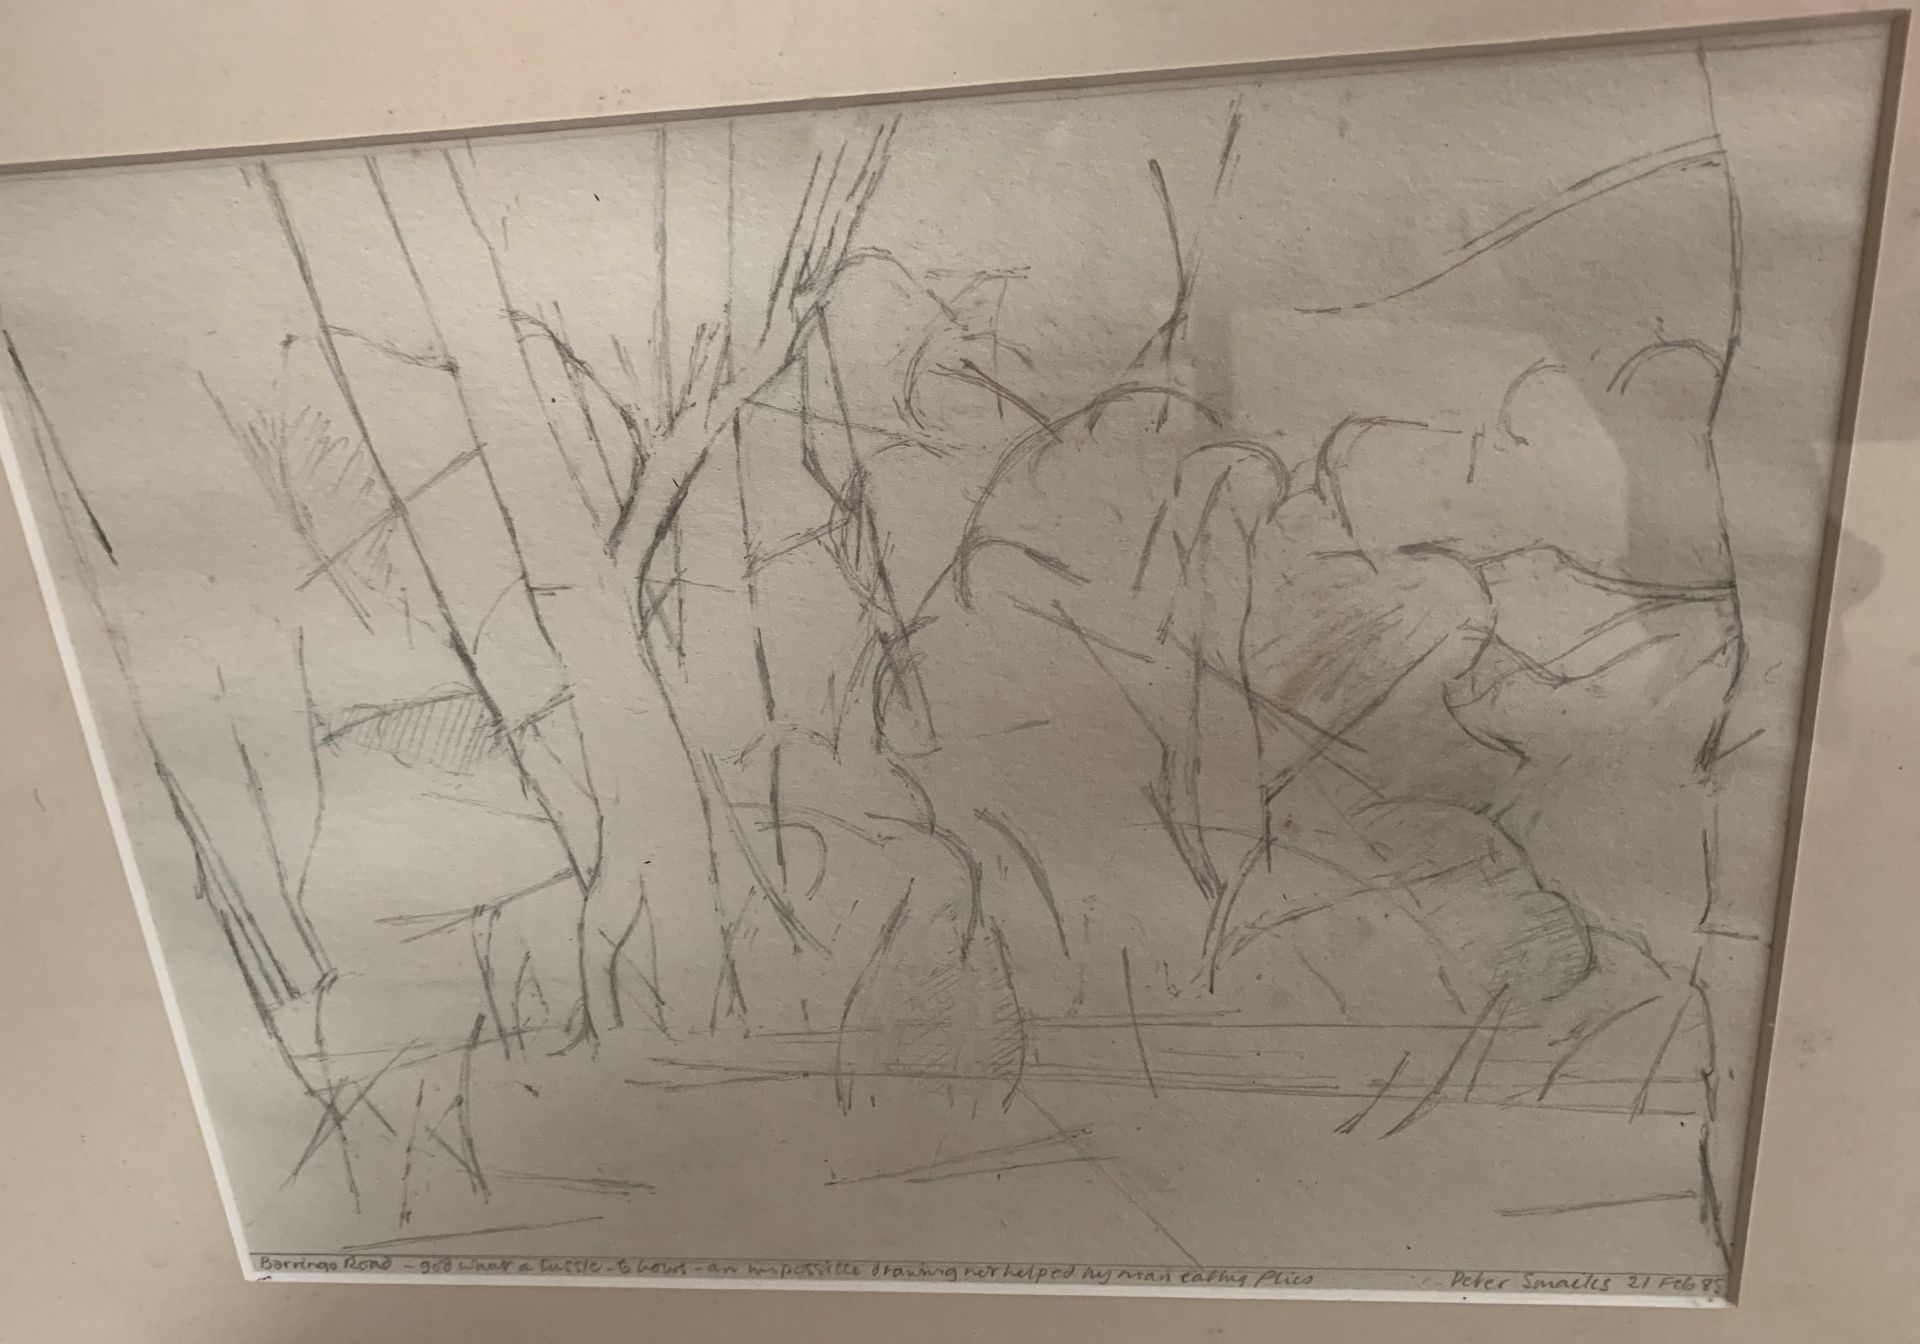 Peter Smailes framed pencil study 'Barringo Road - God what a tussle - 6 hours - an impossible - Image 2 of 2